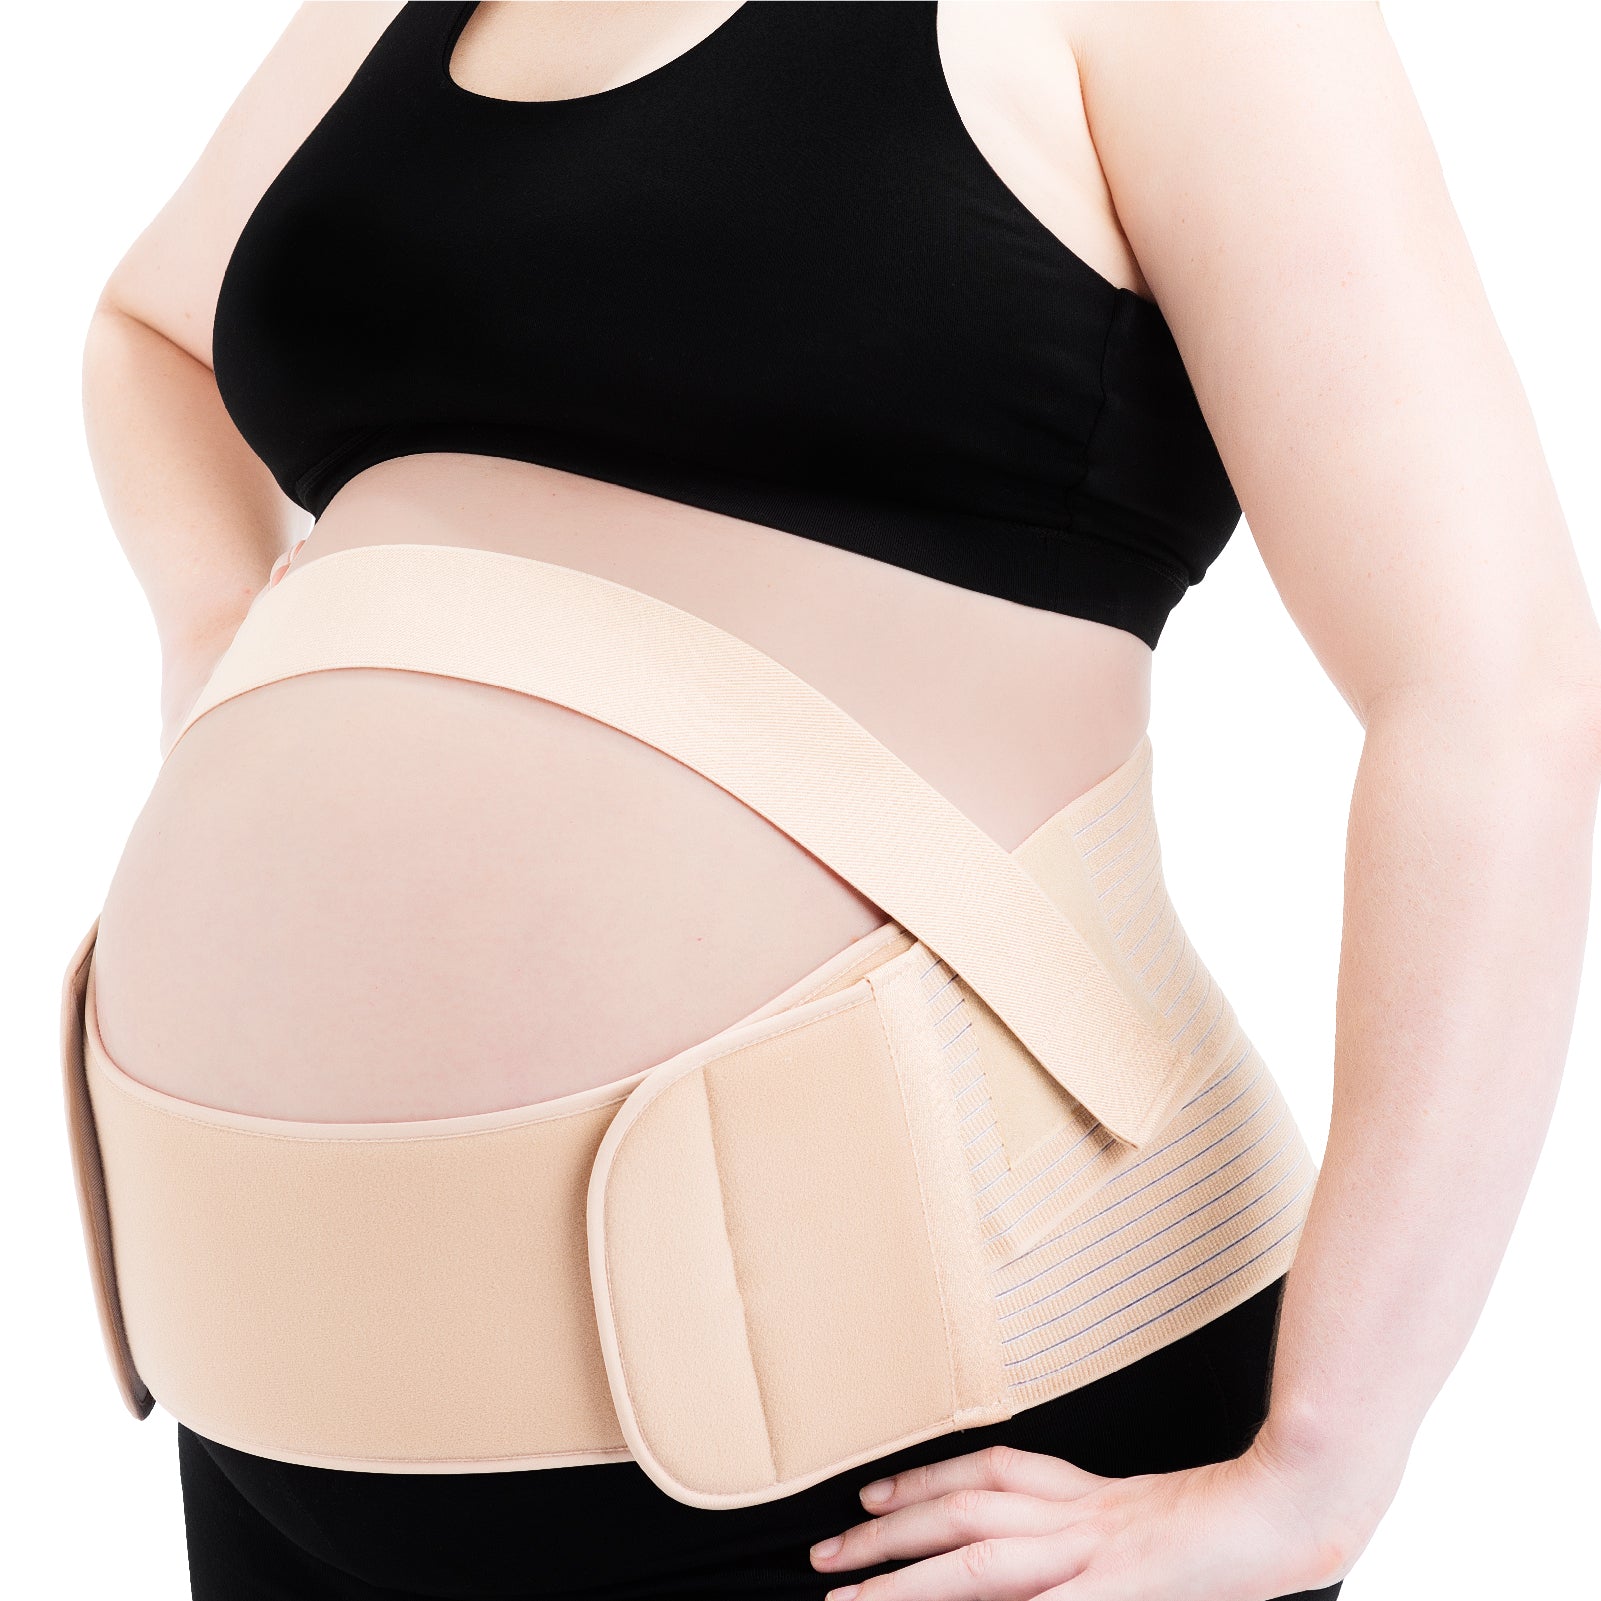 Love Your Bump Belly Belt Pant Extender – Room For Two